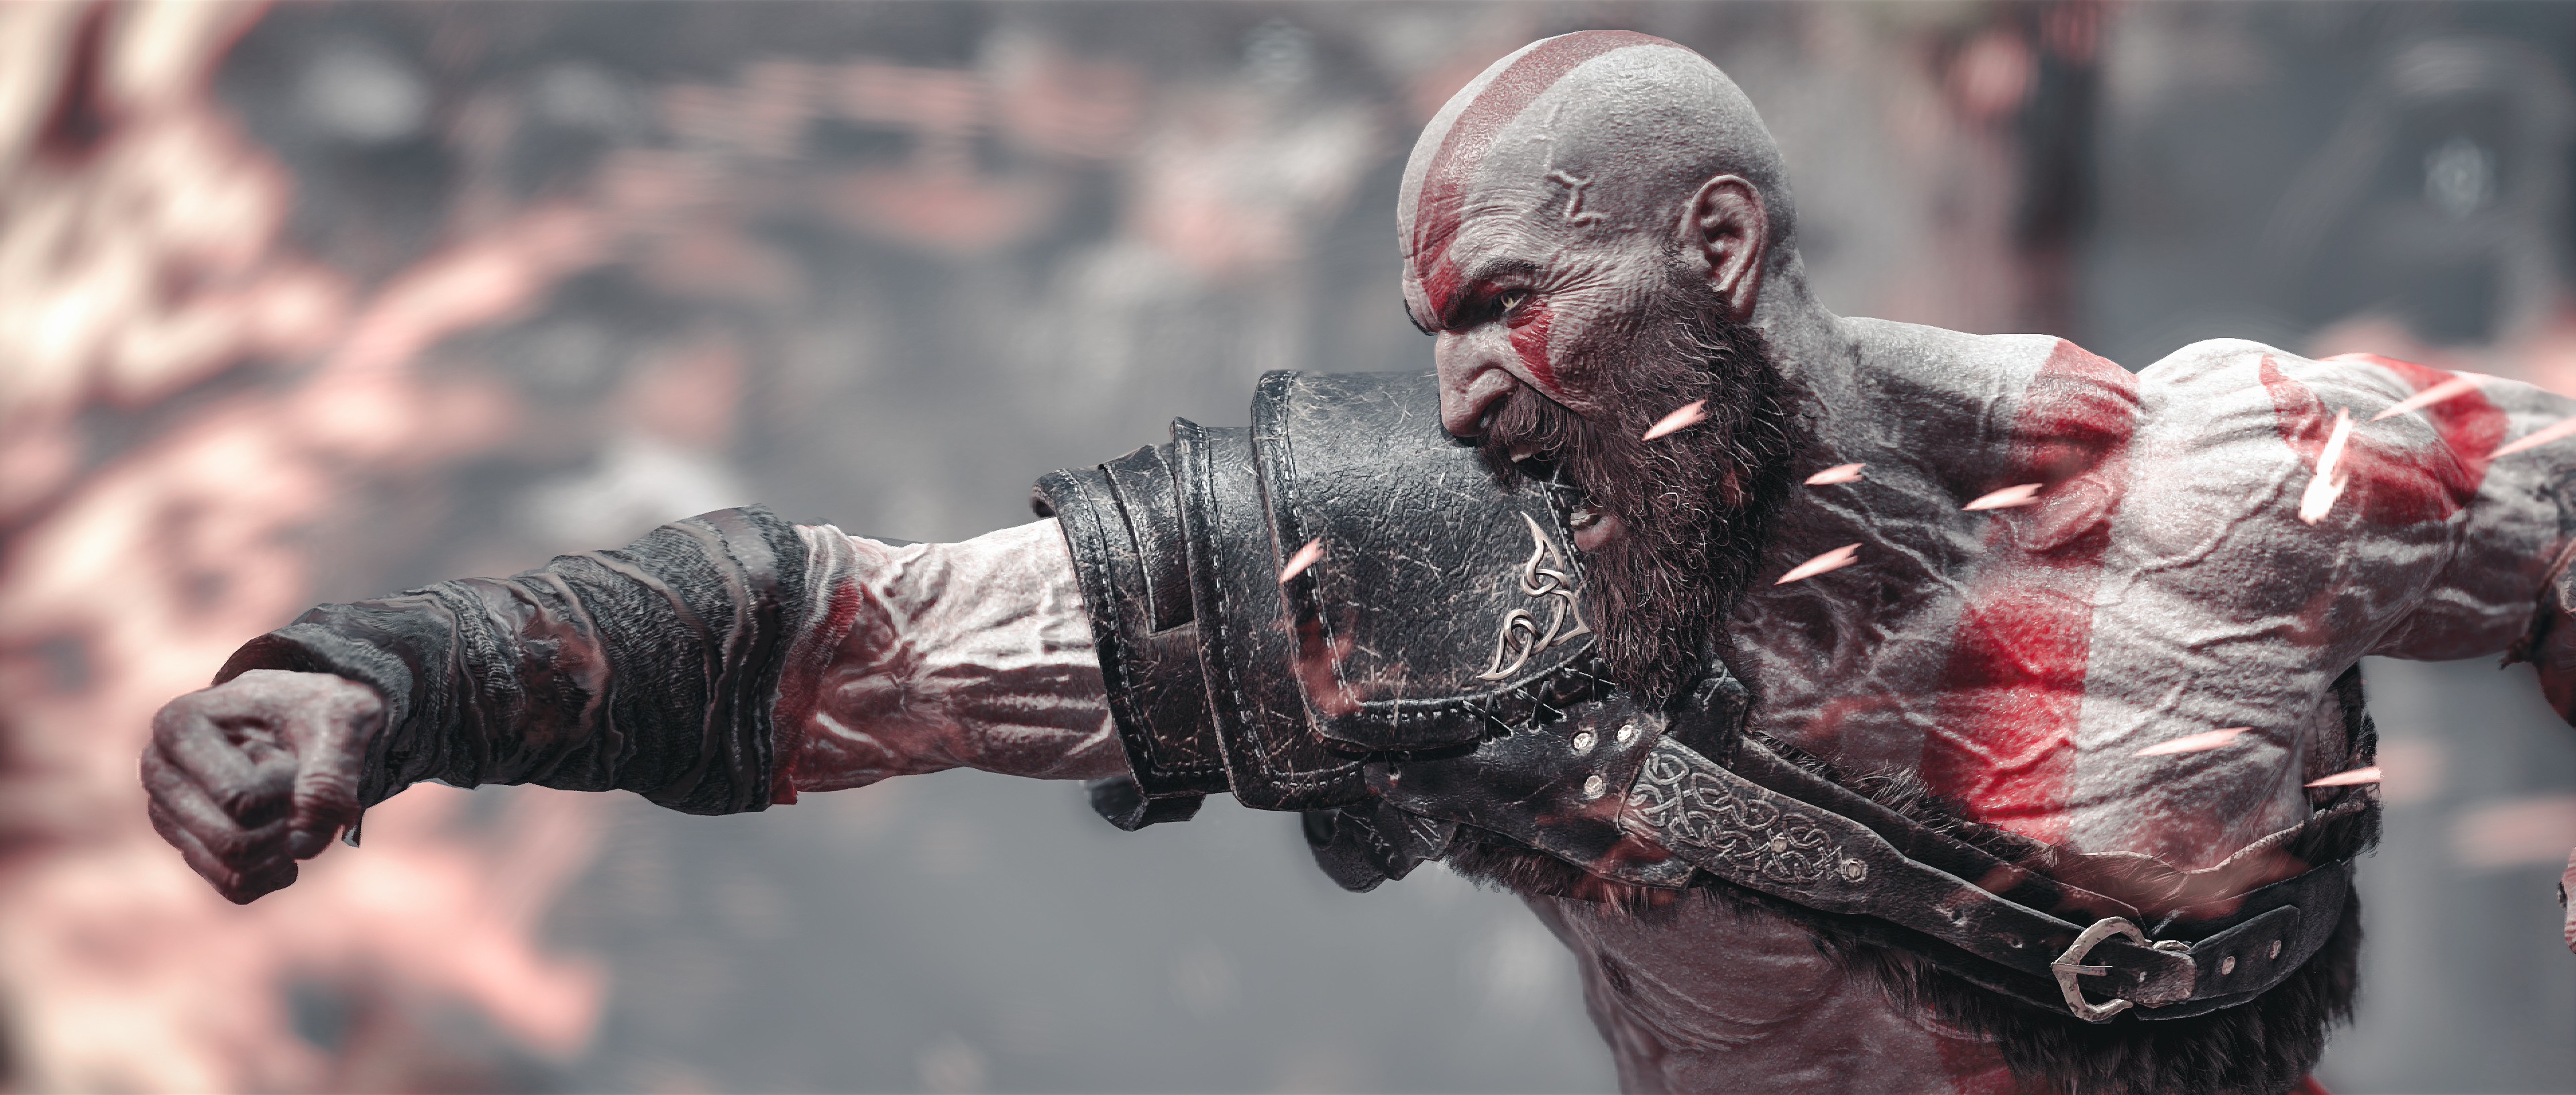 Santa Monica Studio – God of War Ragnarök on X: While this shot only  focuses on Kratos' rage, @GameonFocus 's work showcases all of the emotions  throughout God of War (2018), while